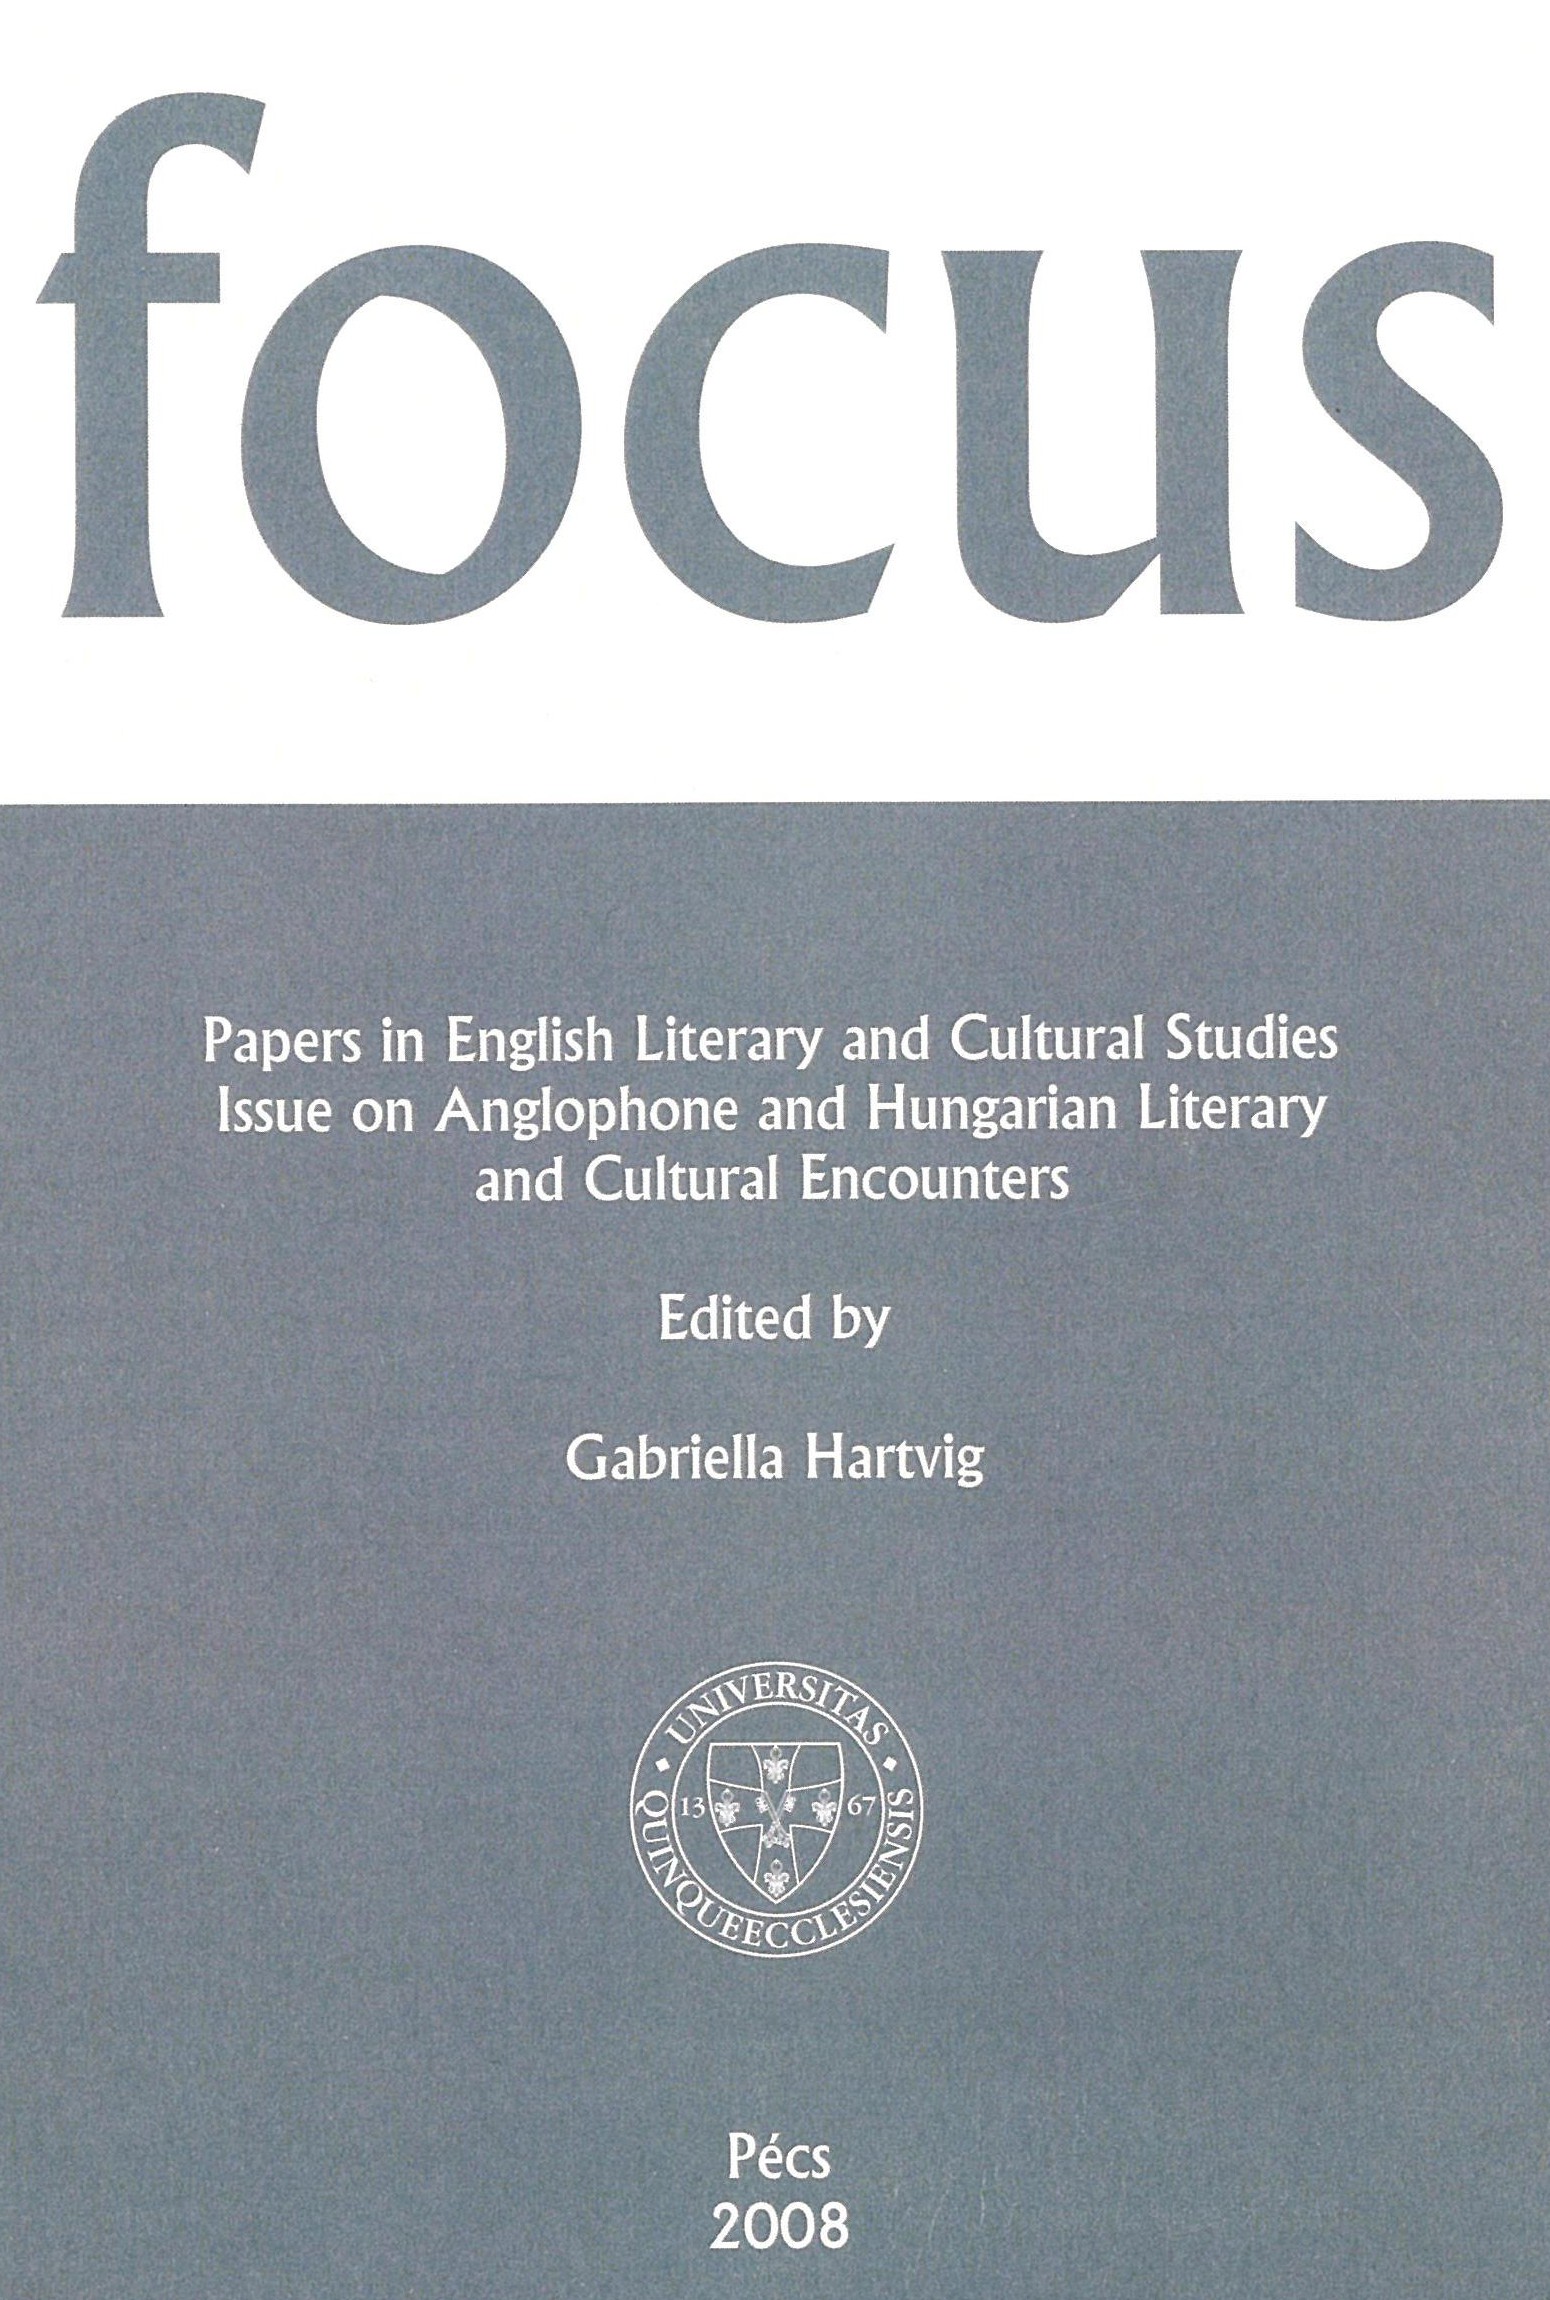 					View Vol. 6 No. 1 (2008): Papers in English Literary and Cultural Studies Issue on Anglophone and Hungarian Literary and Cultural Encounters
				